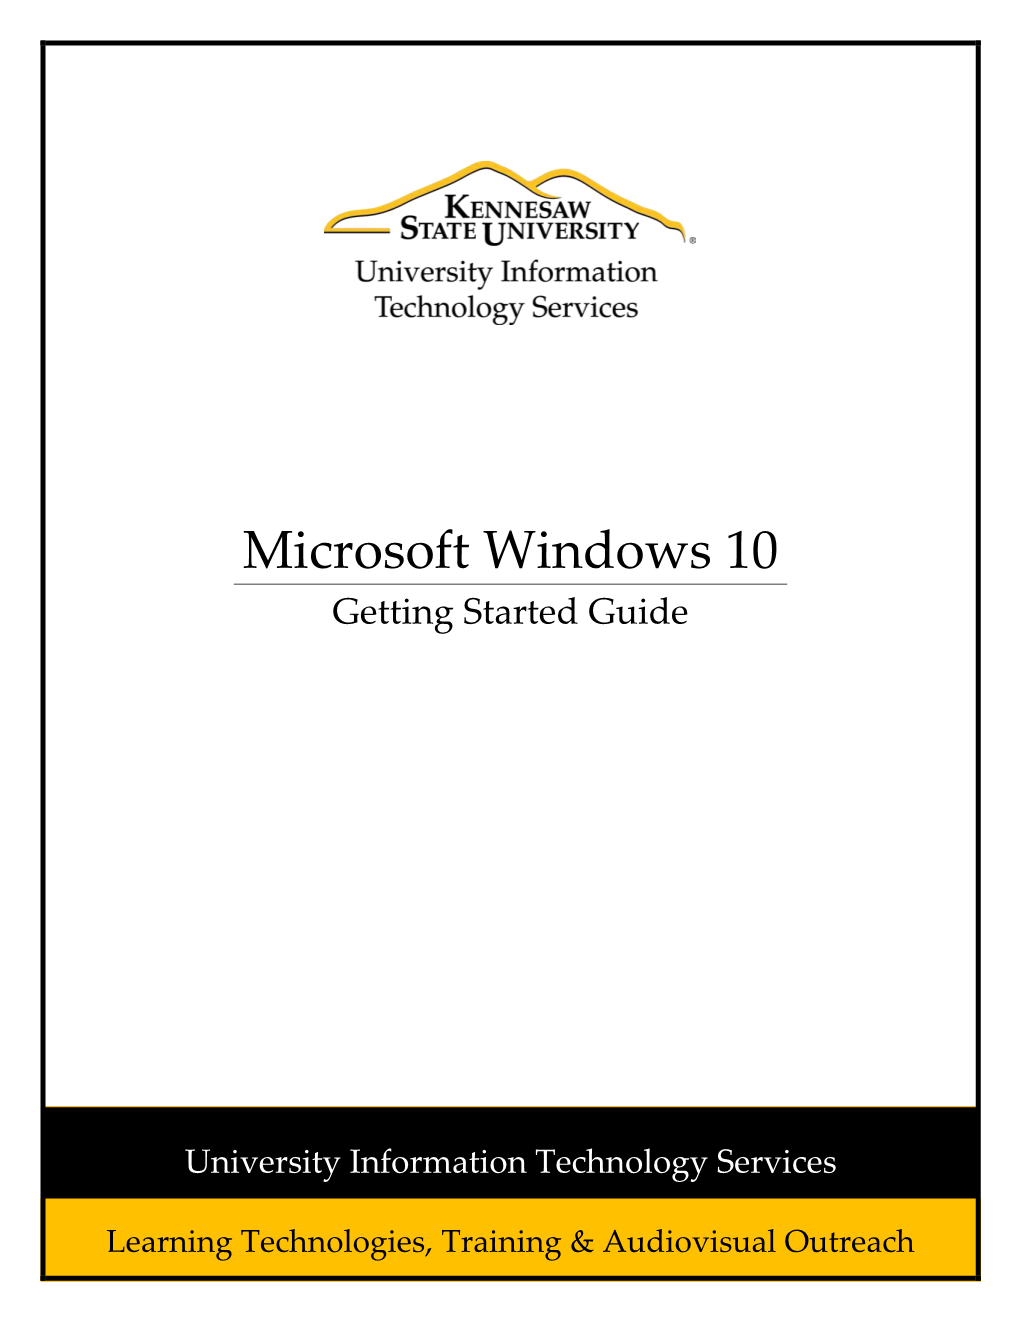 Microsoft Windows 10 Getting Started Guide